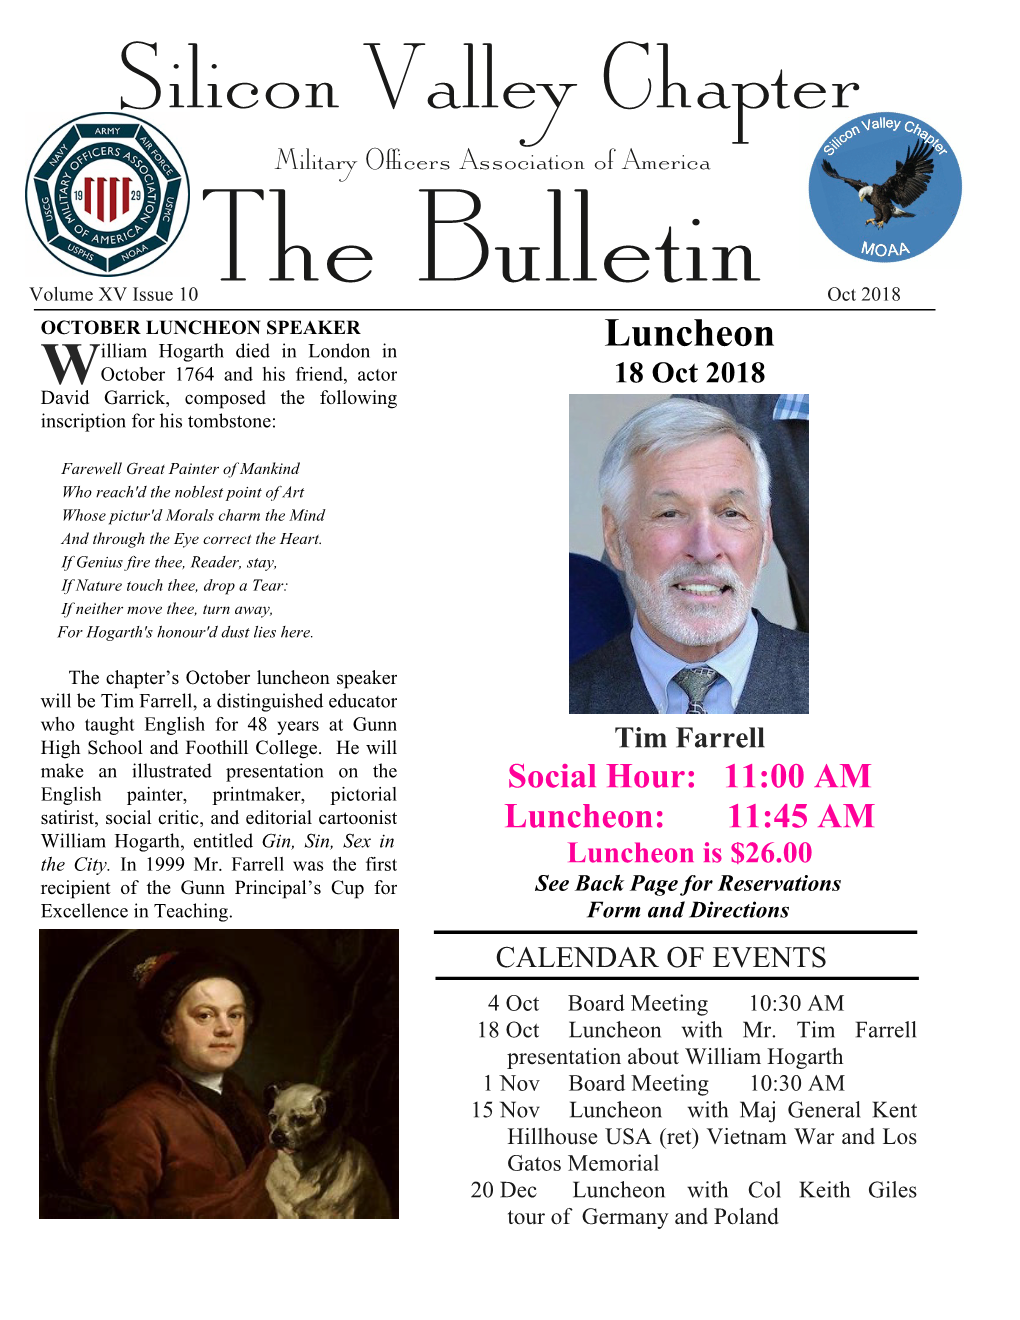 Surviving Spouse Corner Since January 2018, the Chapter Bulletin Has Published 14 Surviving Spouse Corner Articles Or Related Subject Matter